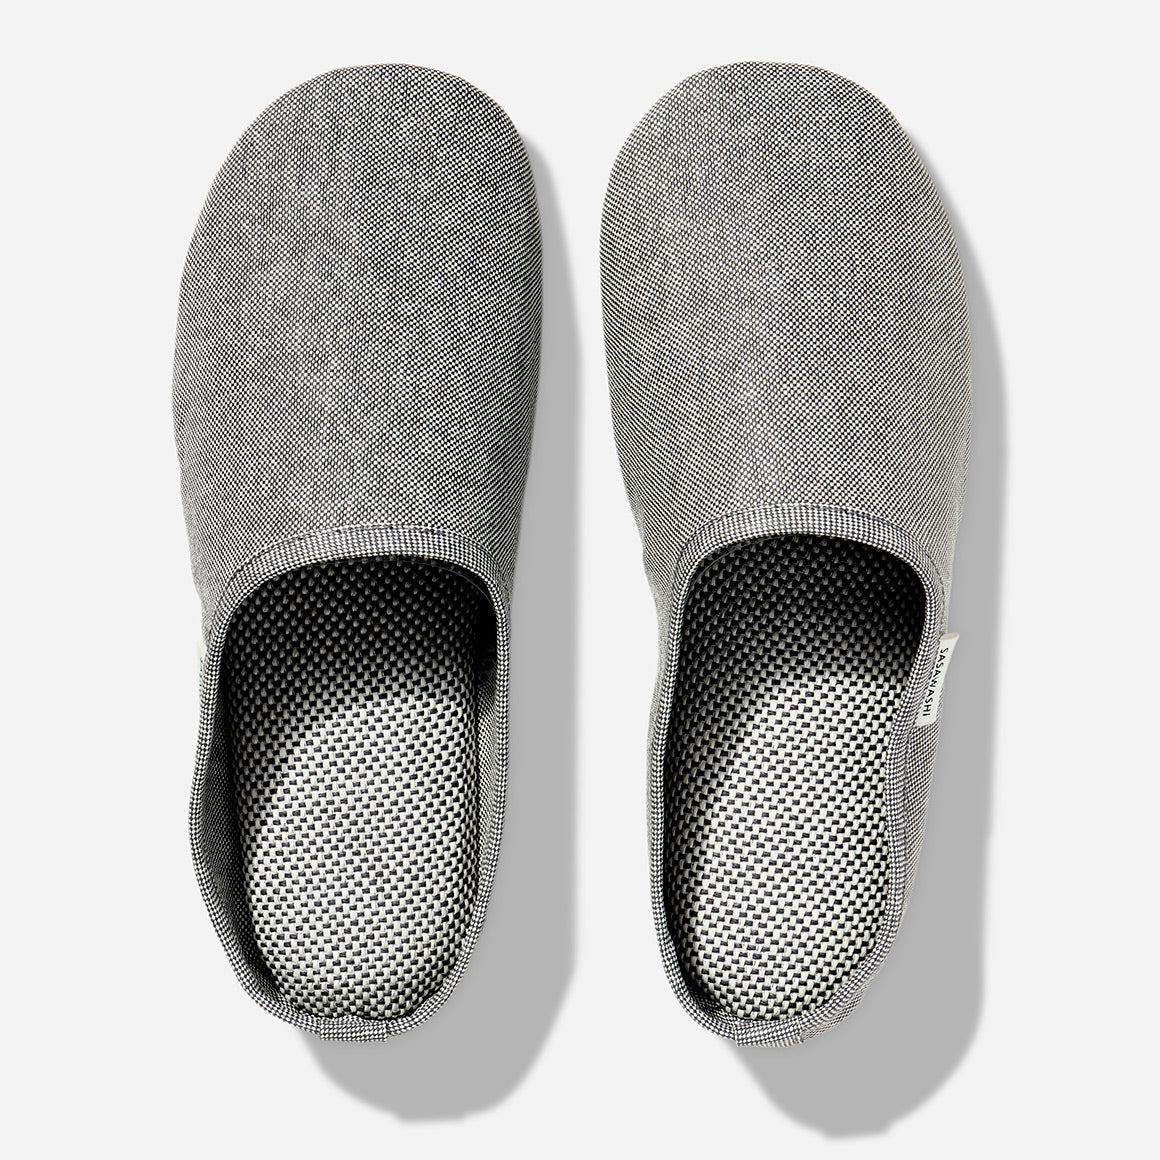 Japanese-style room slippers in light grey color photographed against a white background. Each slipper has Saswashi written on tag near foot opening.